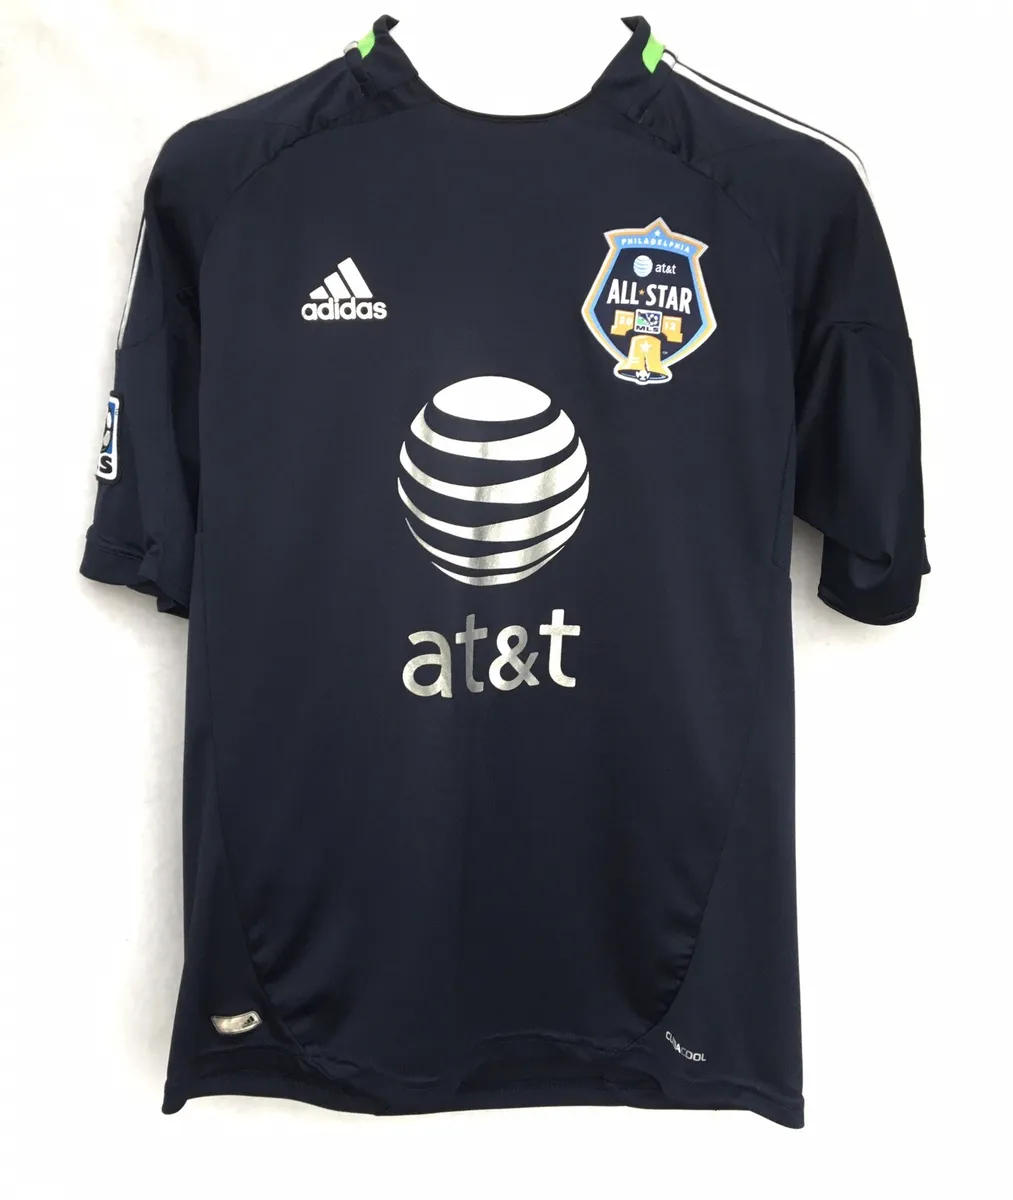 mls all star jersey authentic